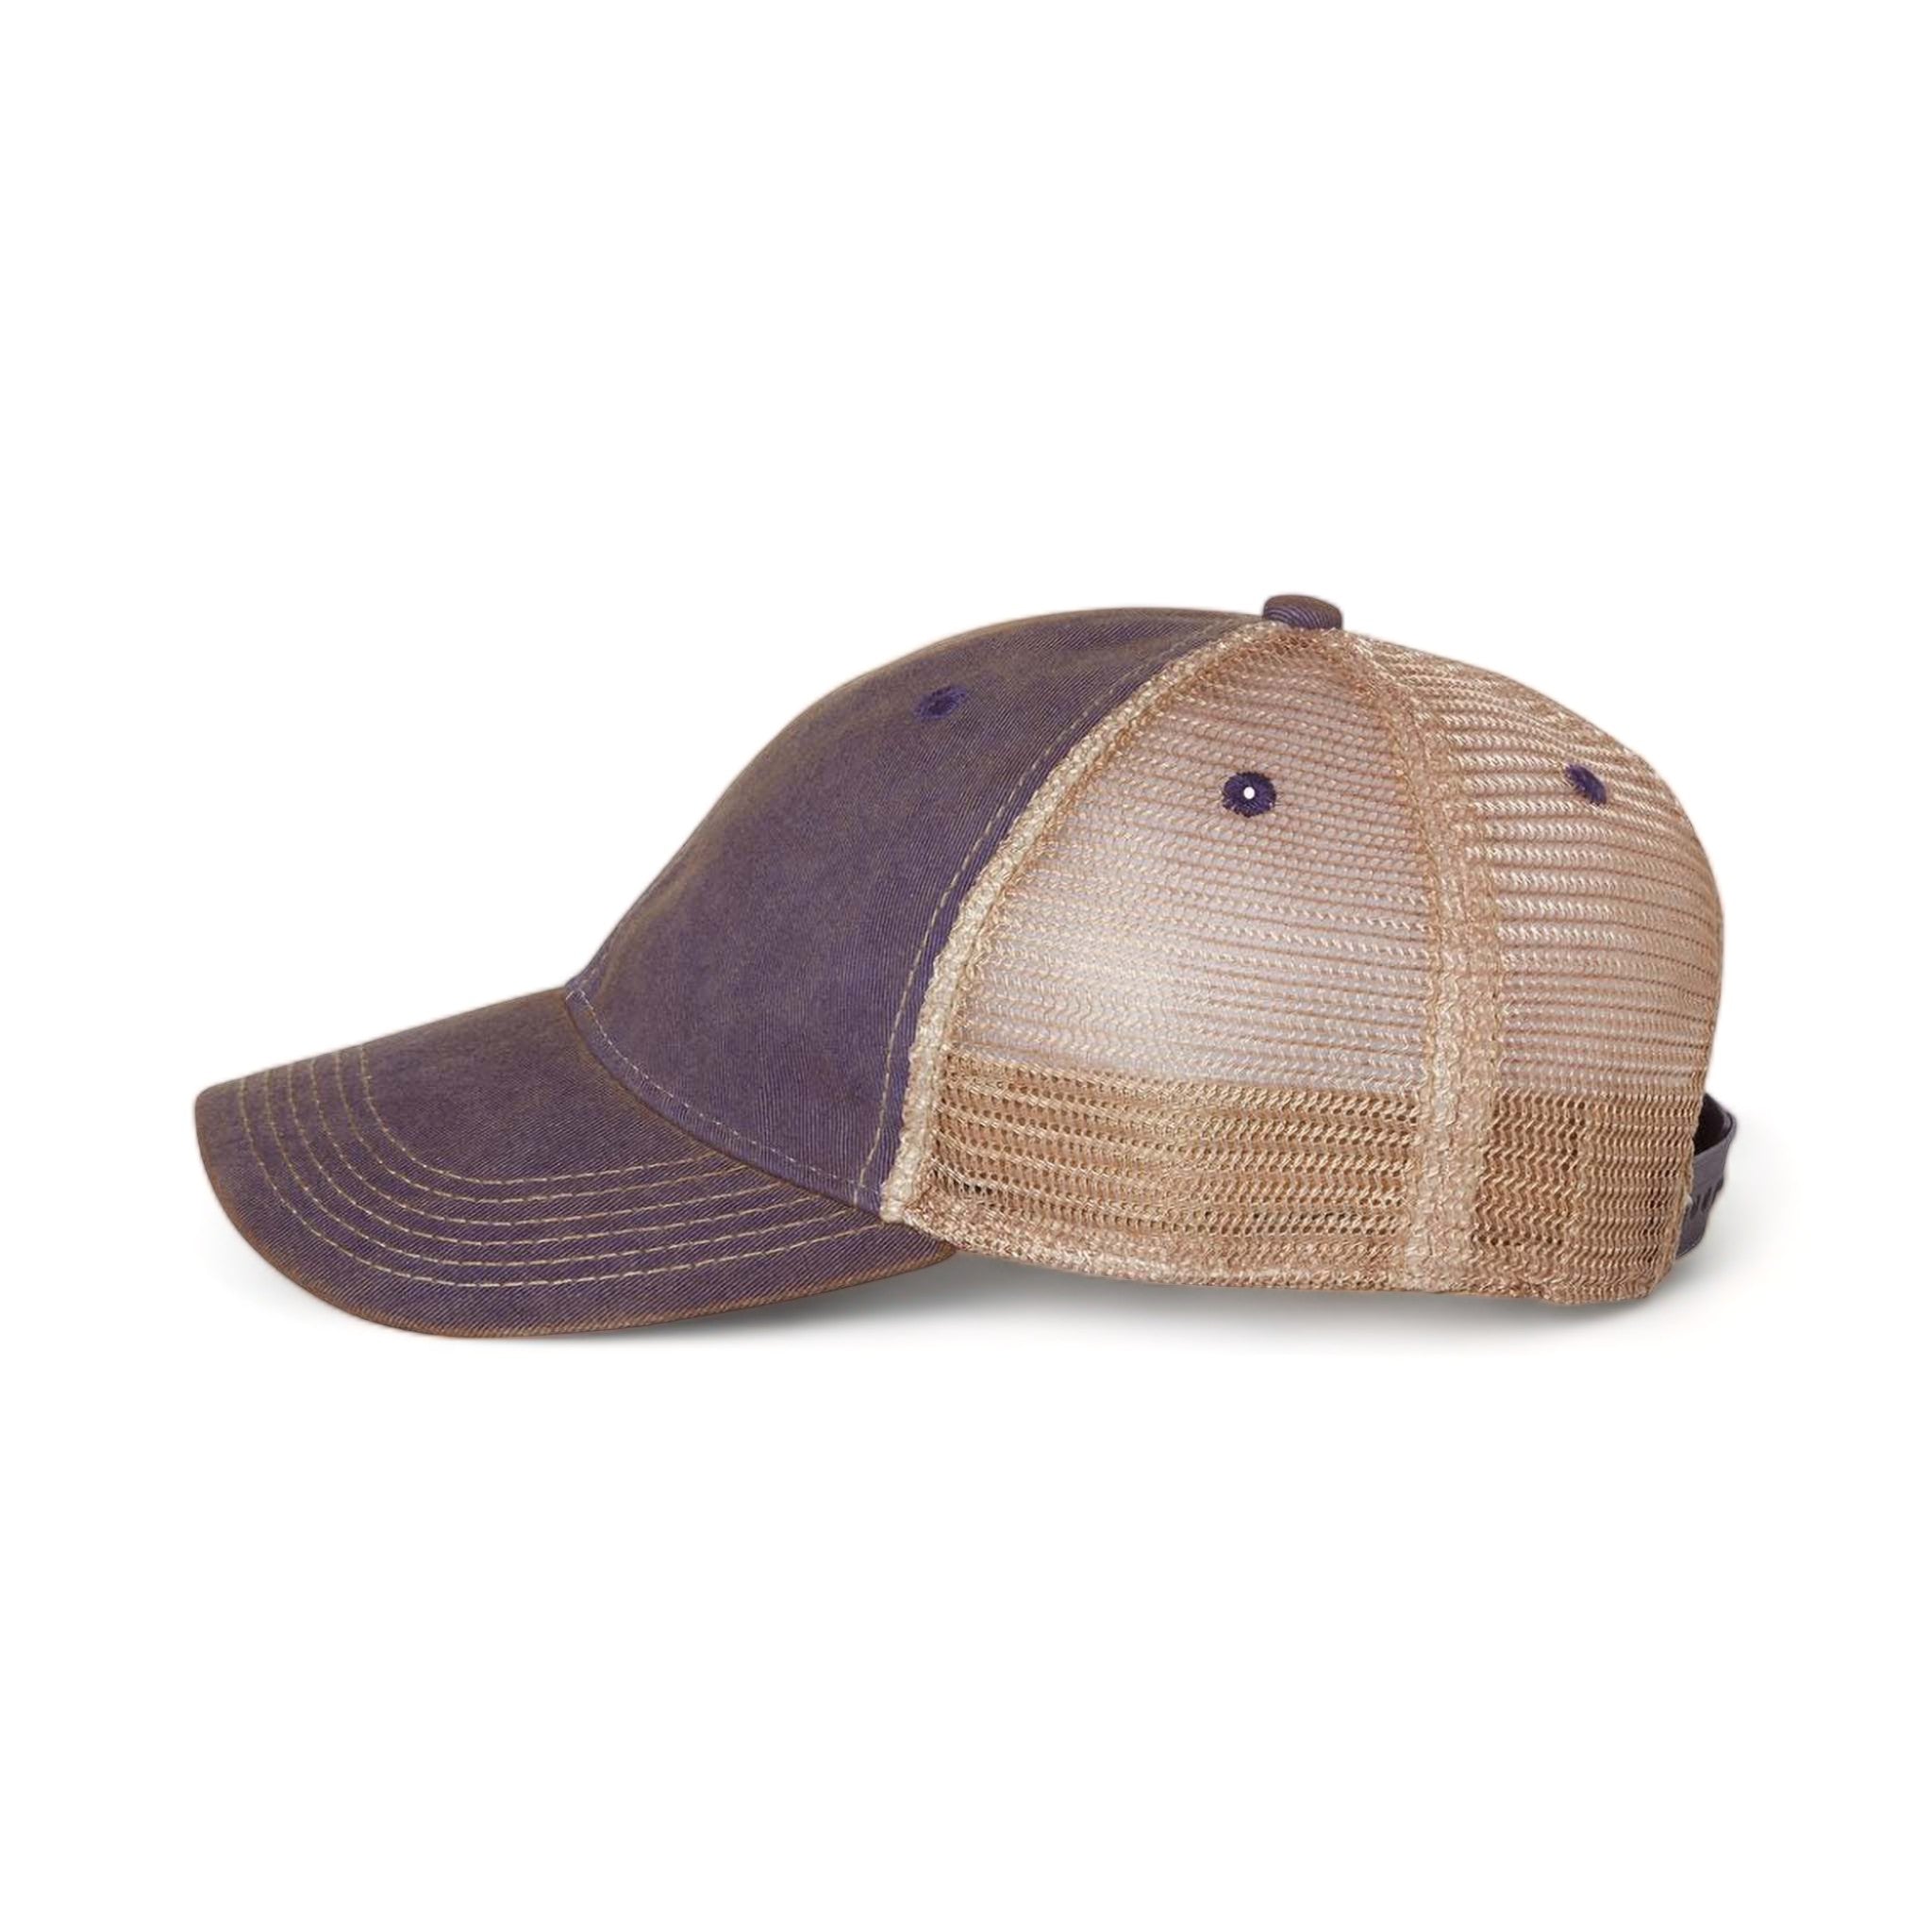 Side view of LEGACY OFA custom hat in purple and khaki